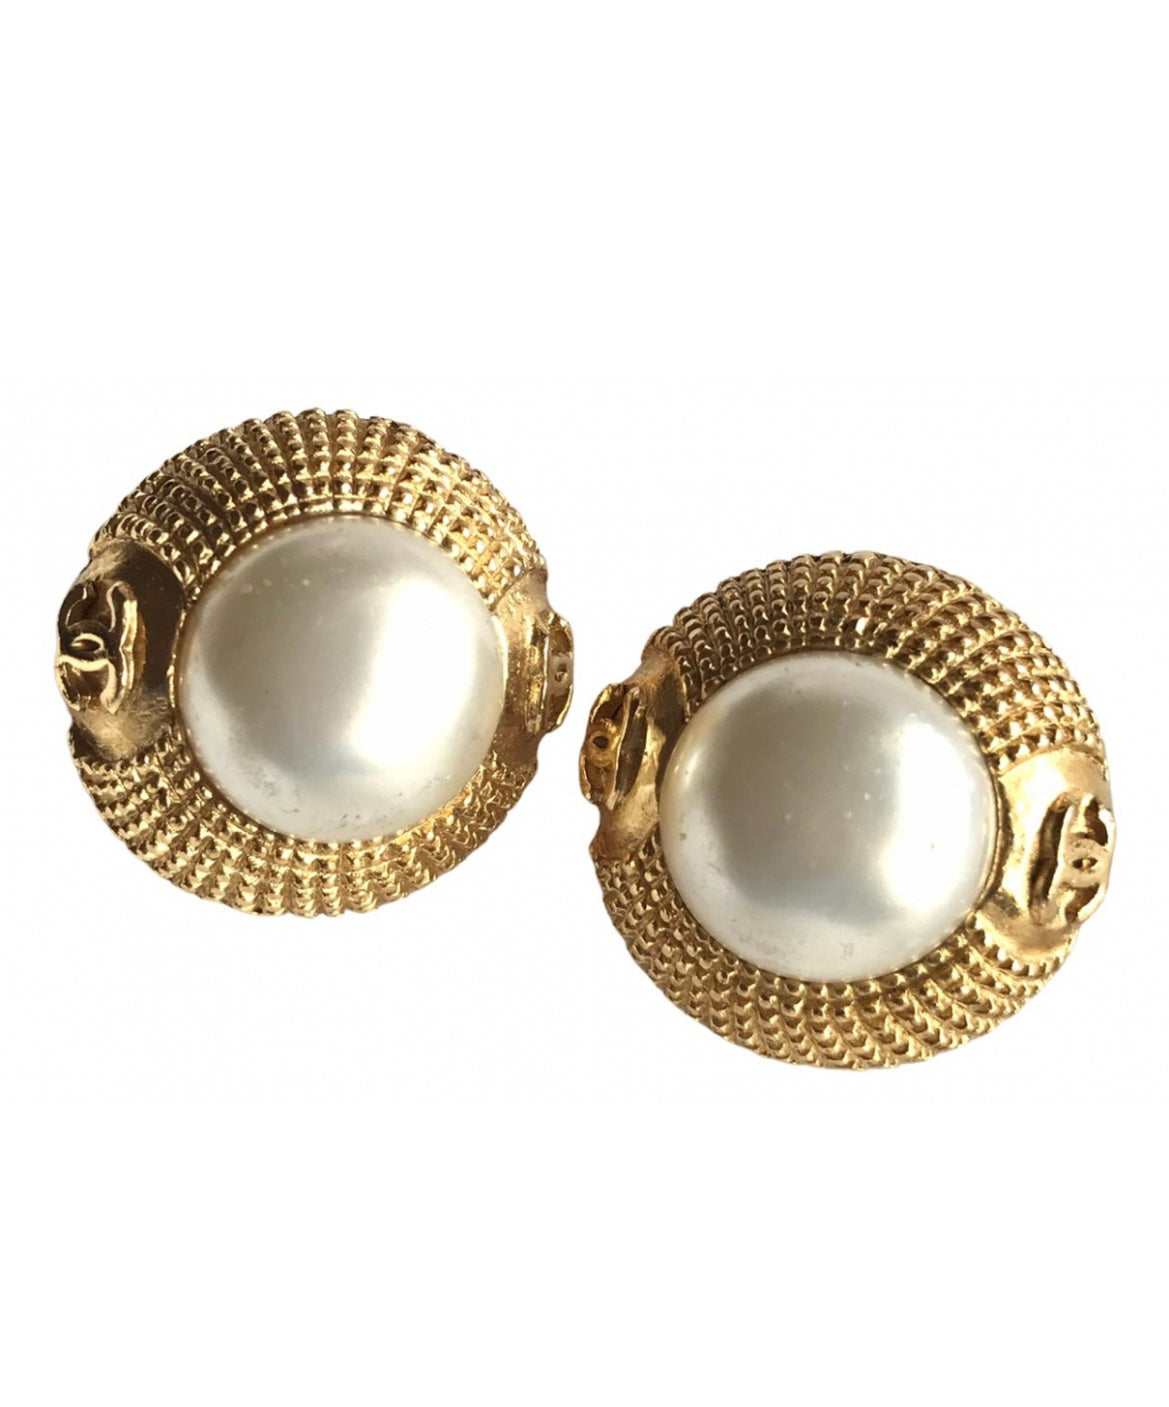 Vintage CHANEL gold tone round earrings with faux pearl and CC